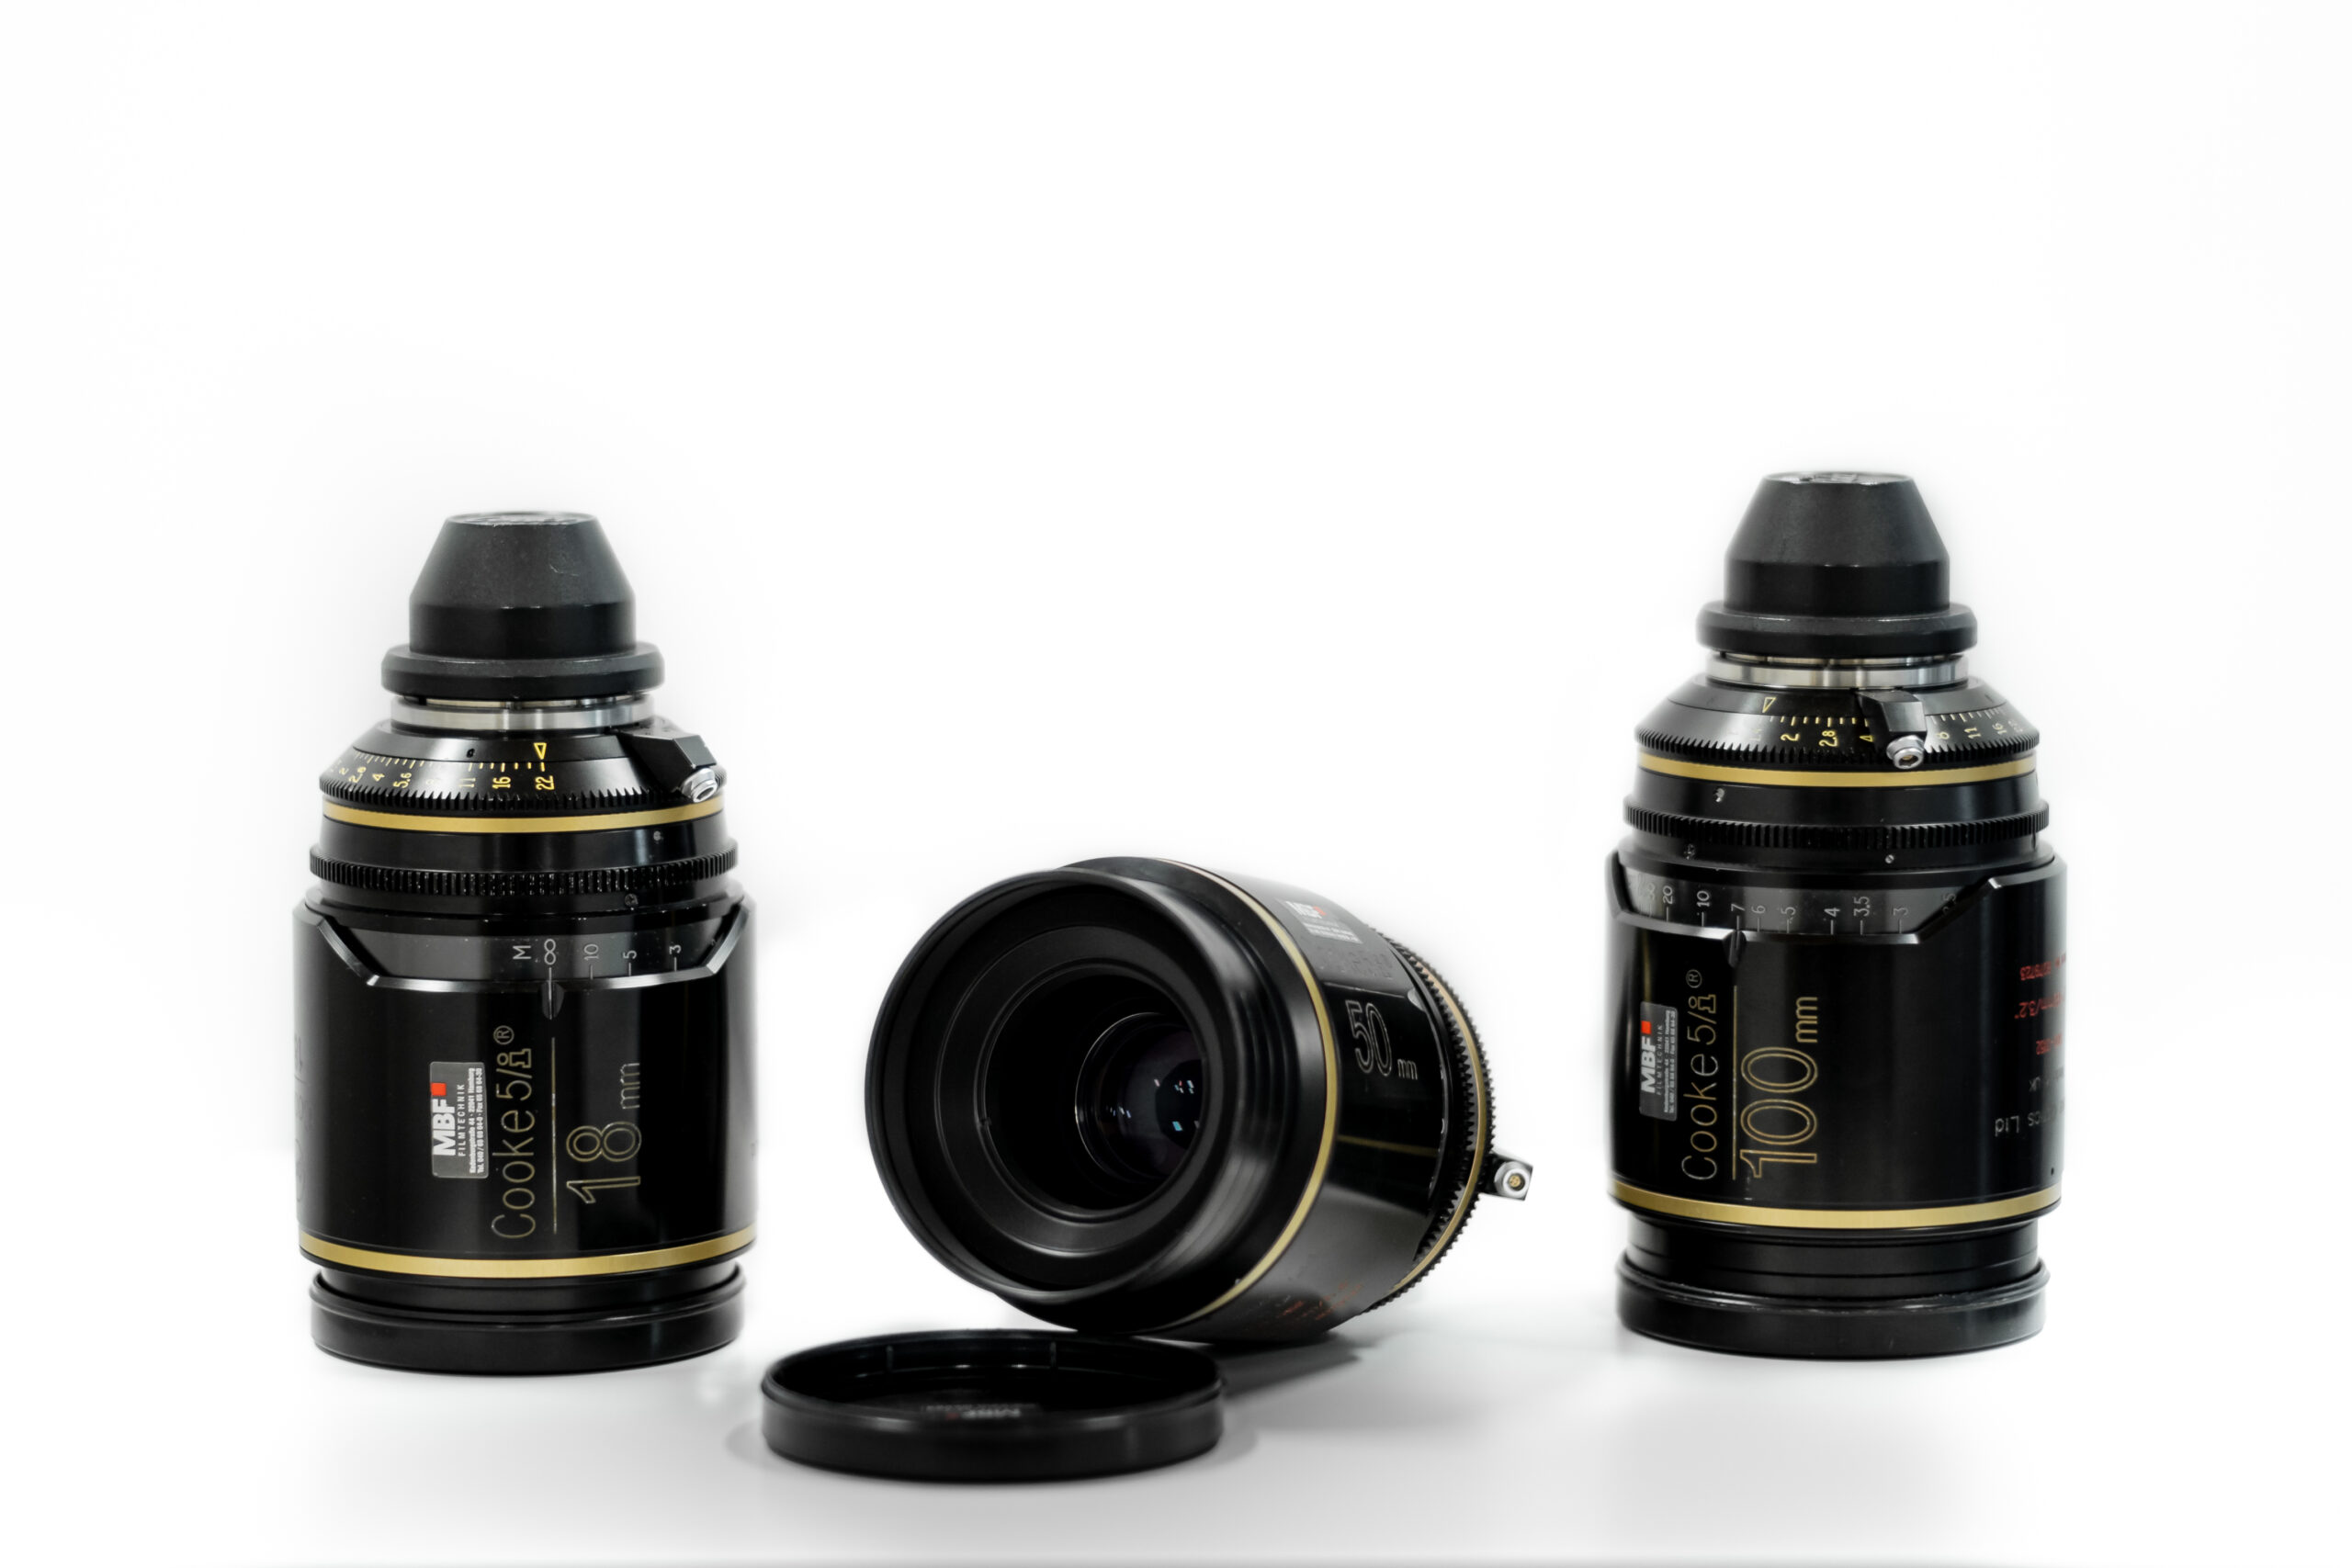 Cooke S4